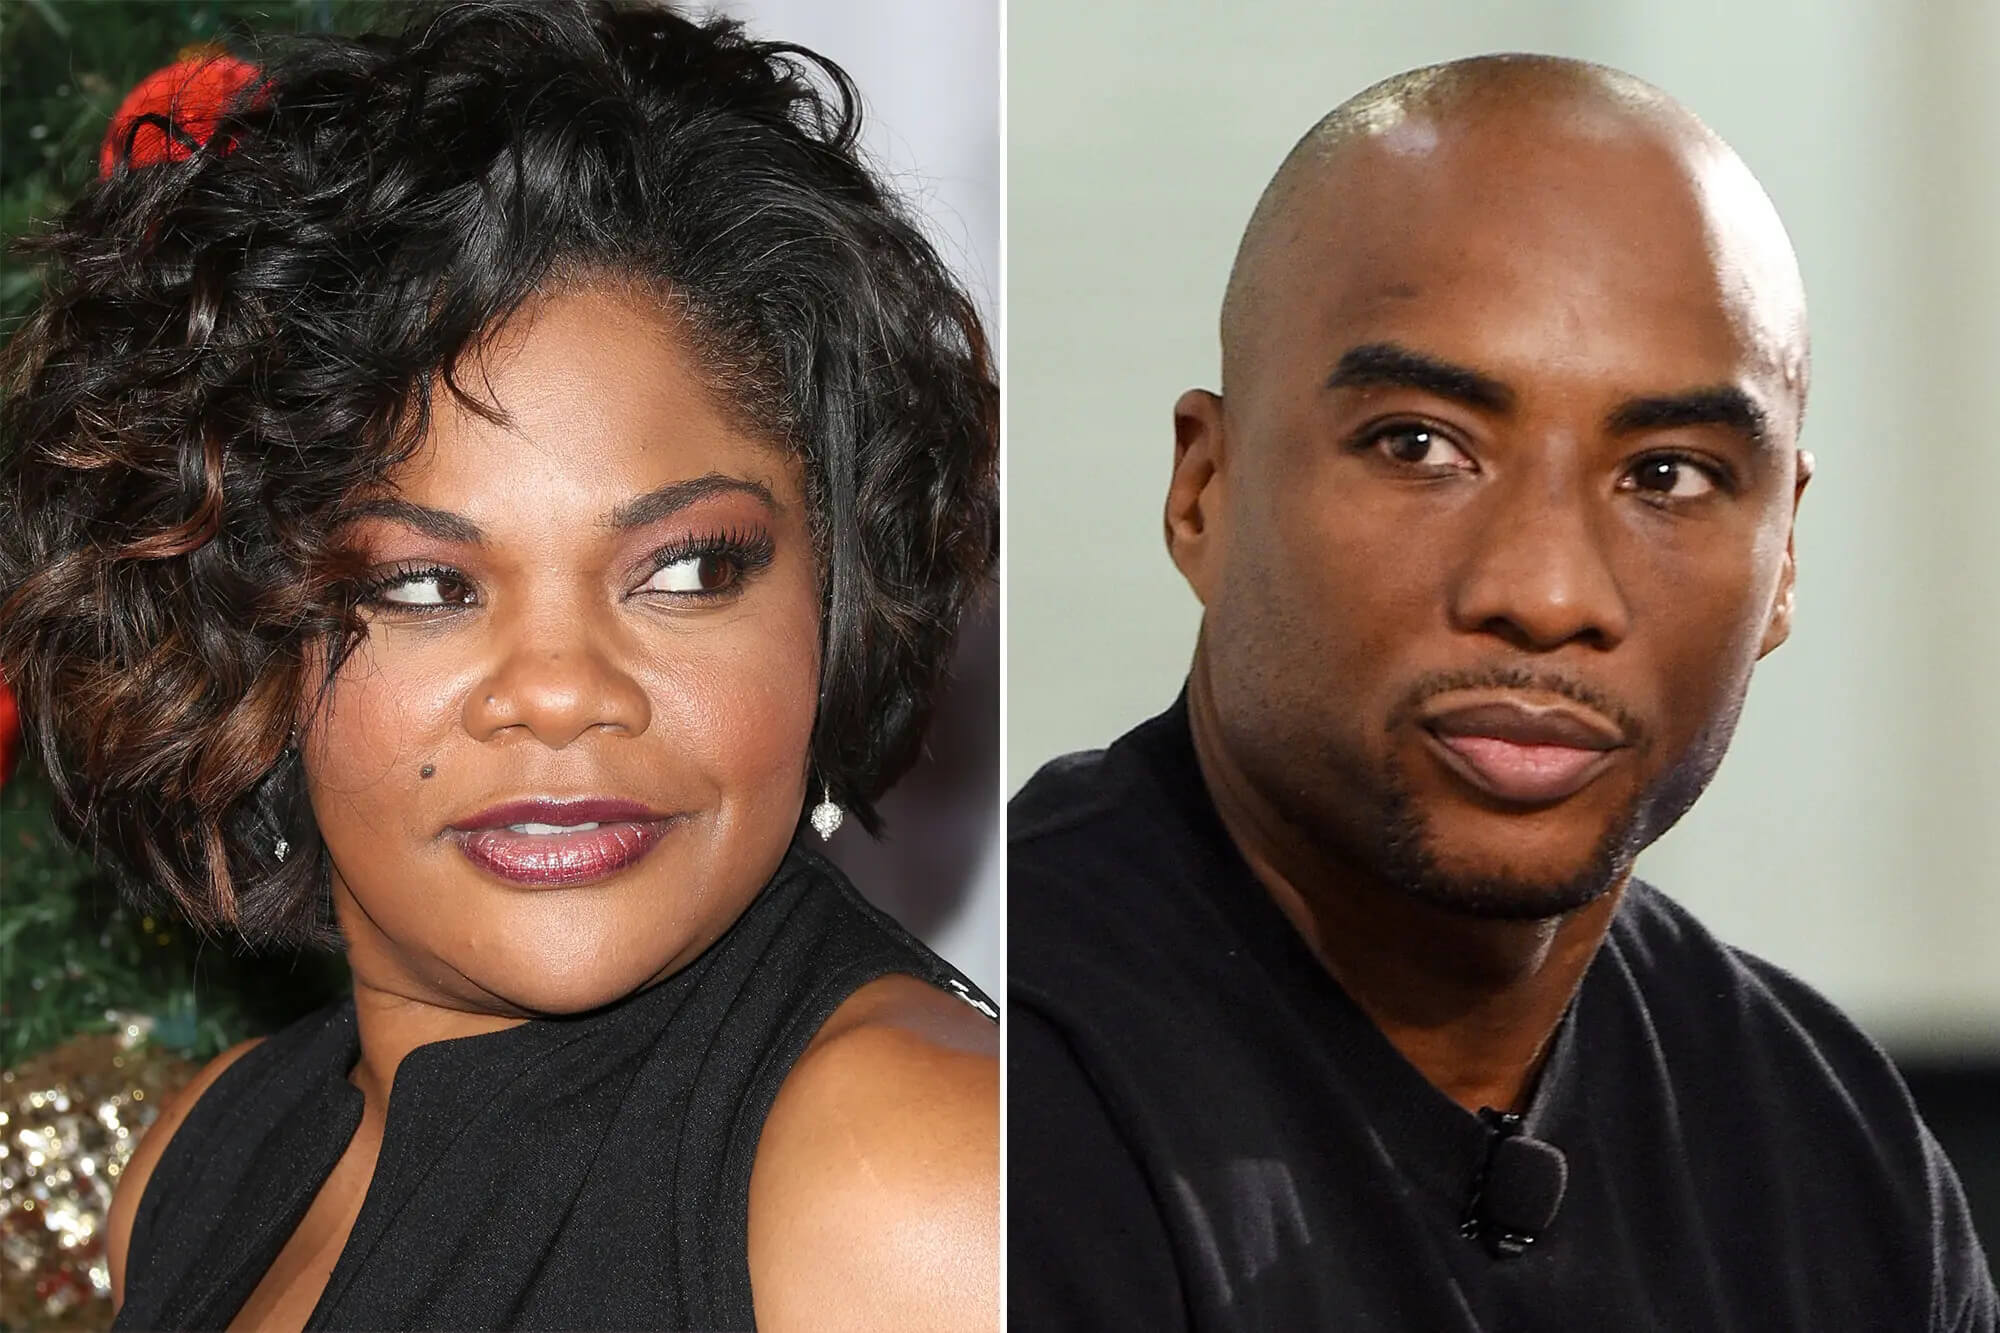 Charlamagne Tha God Apologizes To Mo’Nique For Past Comments